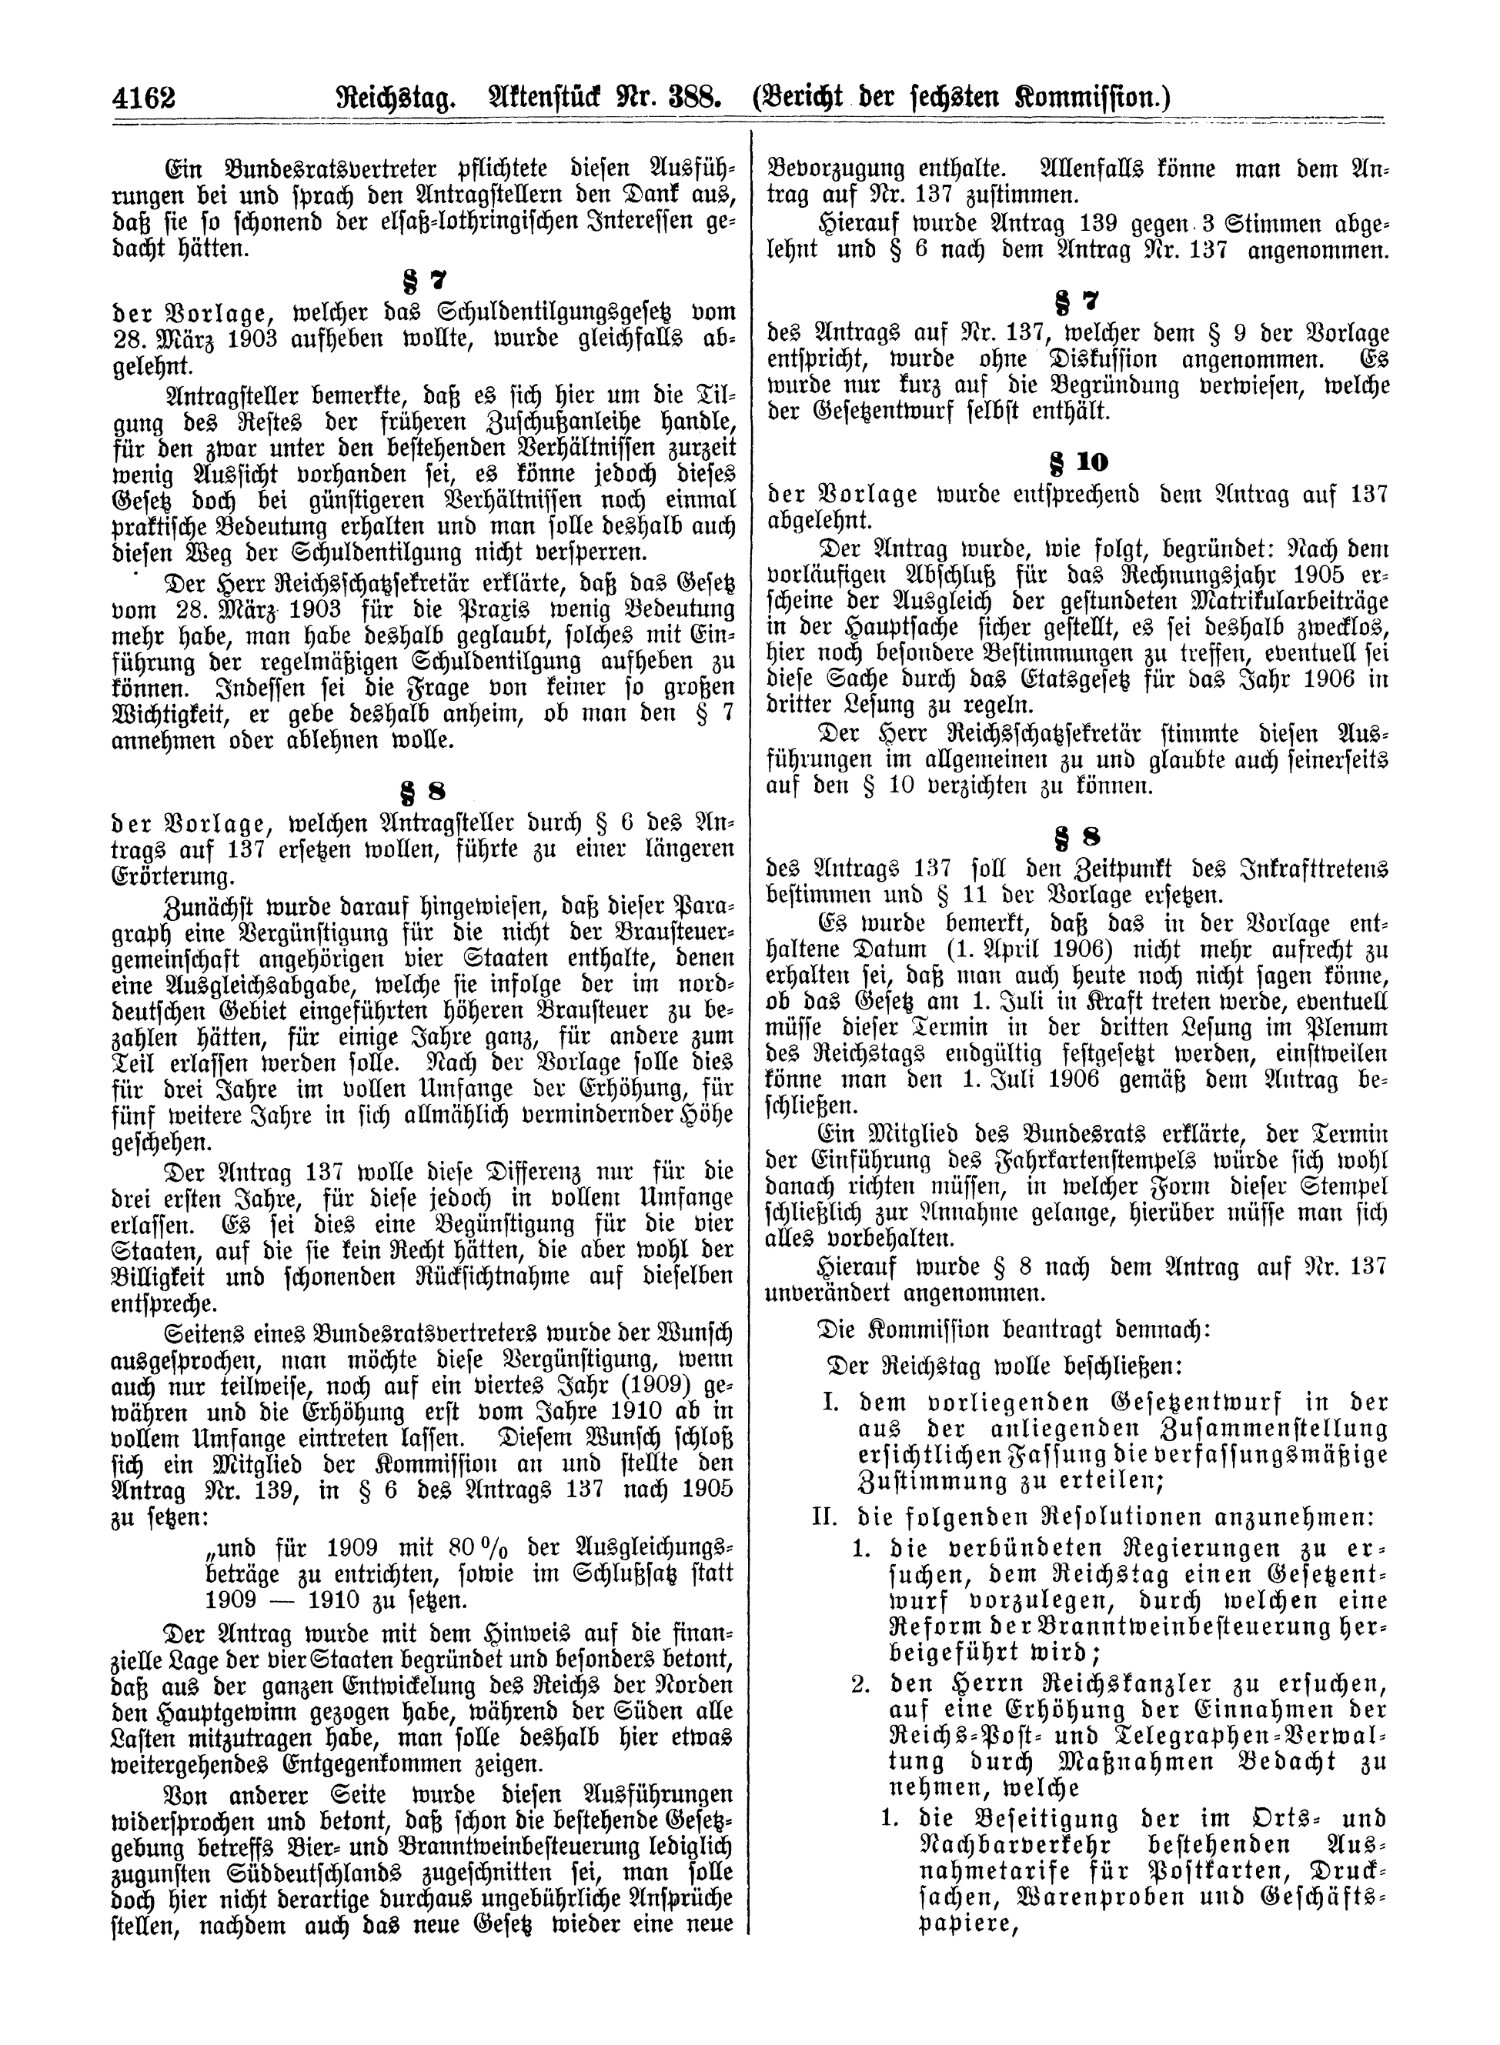 Scan of page 4162